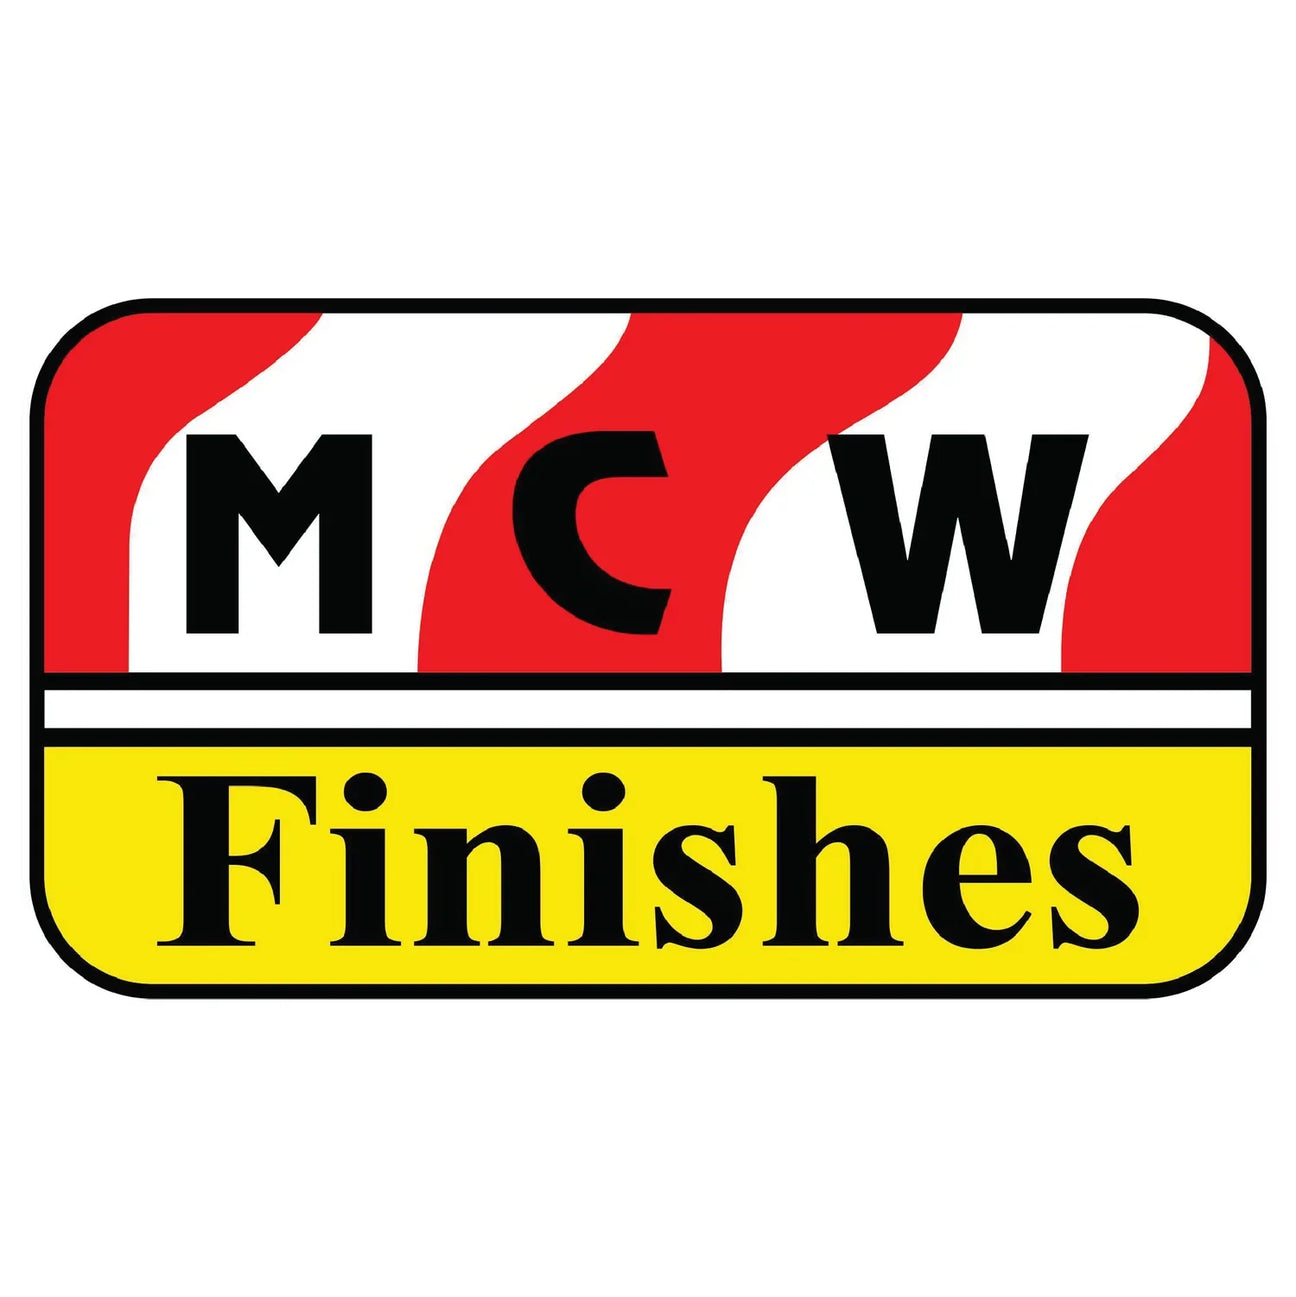 MCW Finishes Print It Decals